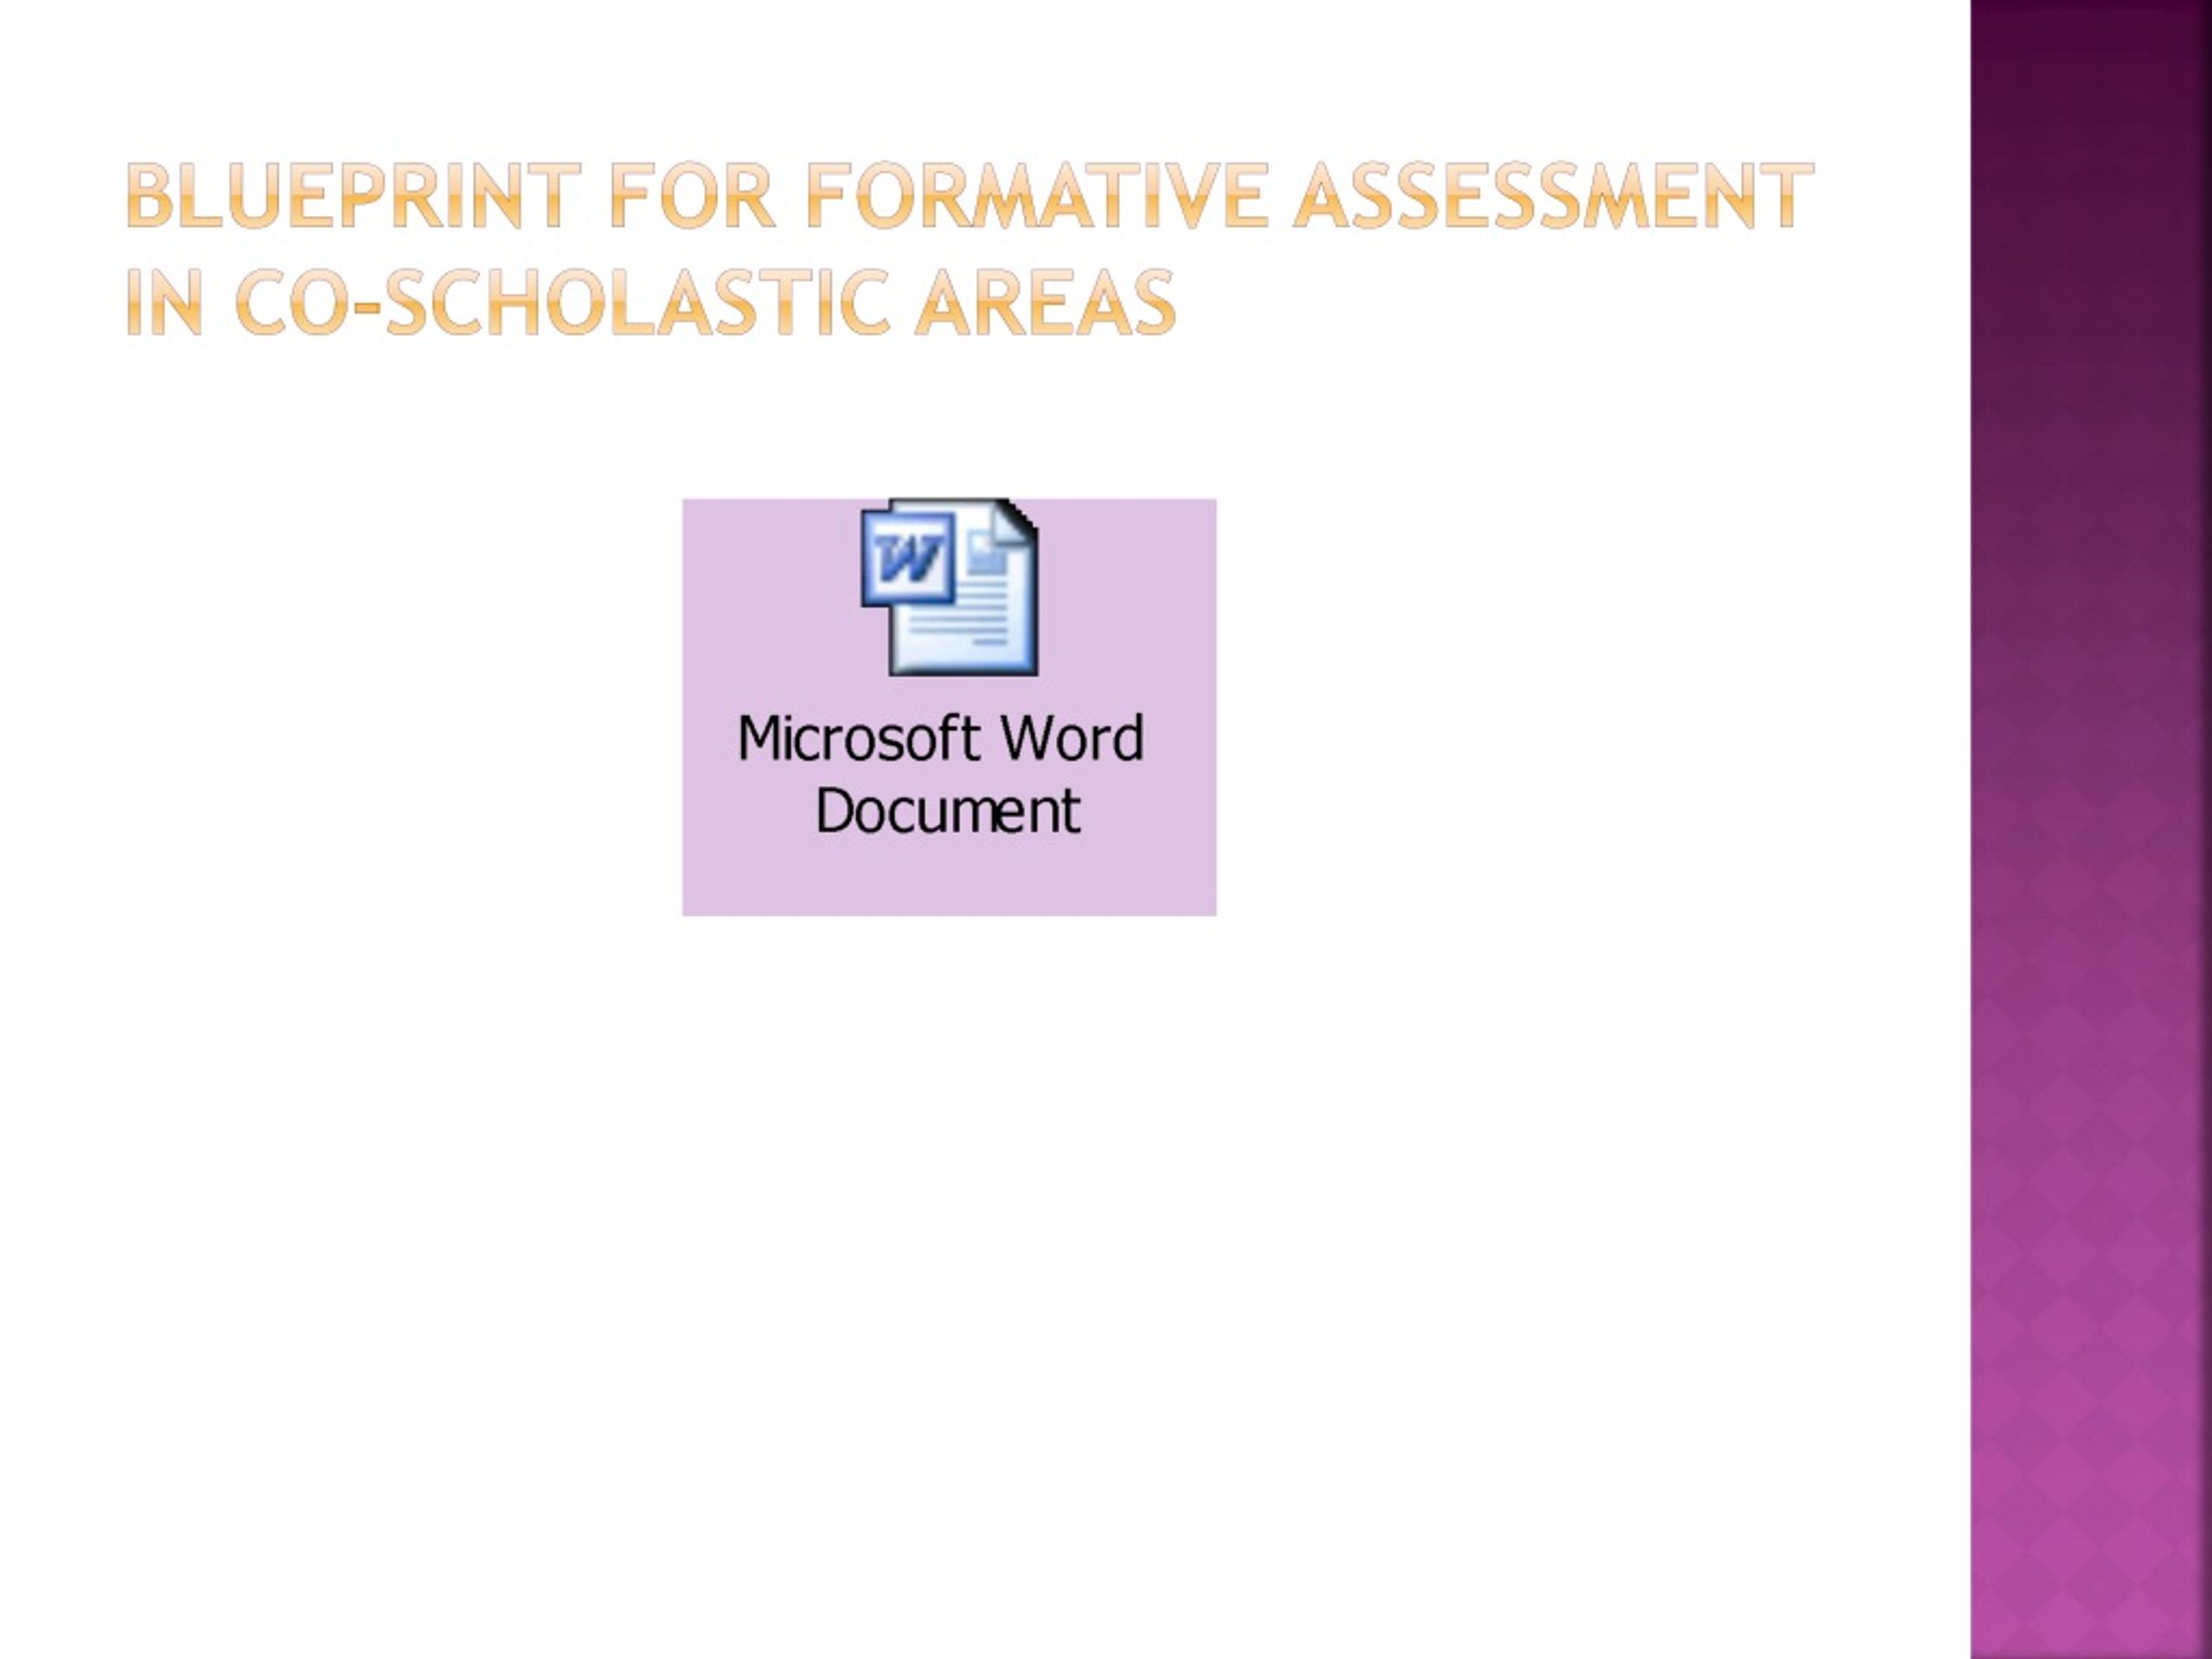 Ppt Formative Assessment For Co Scholastic Areas Powerpoint Presentation Id9247413 1902